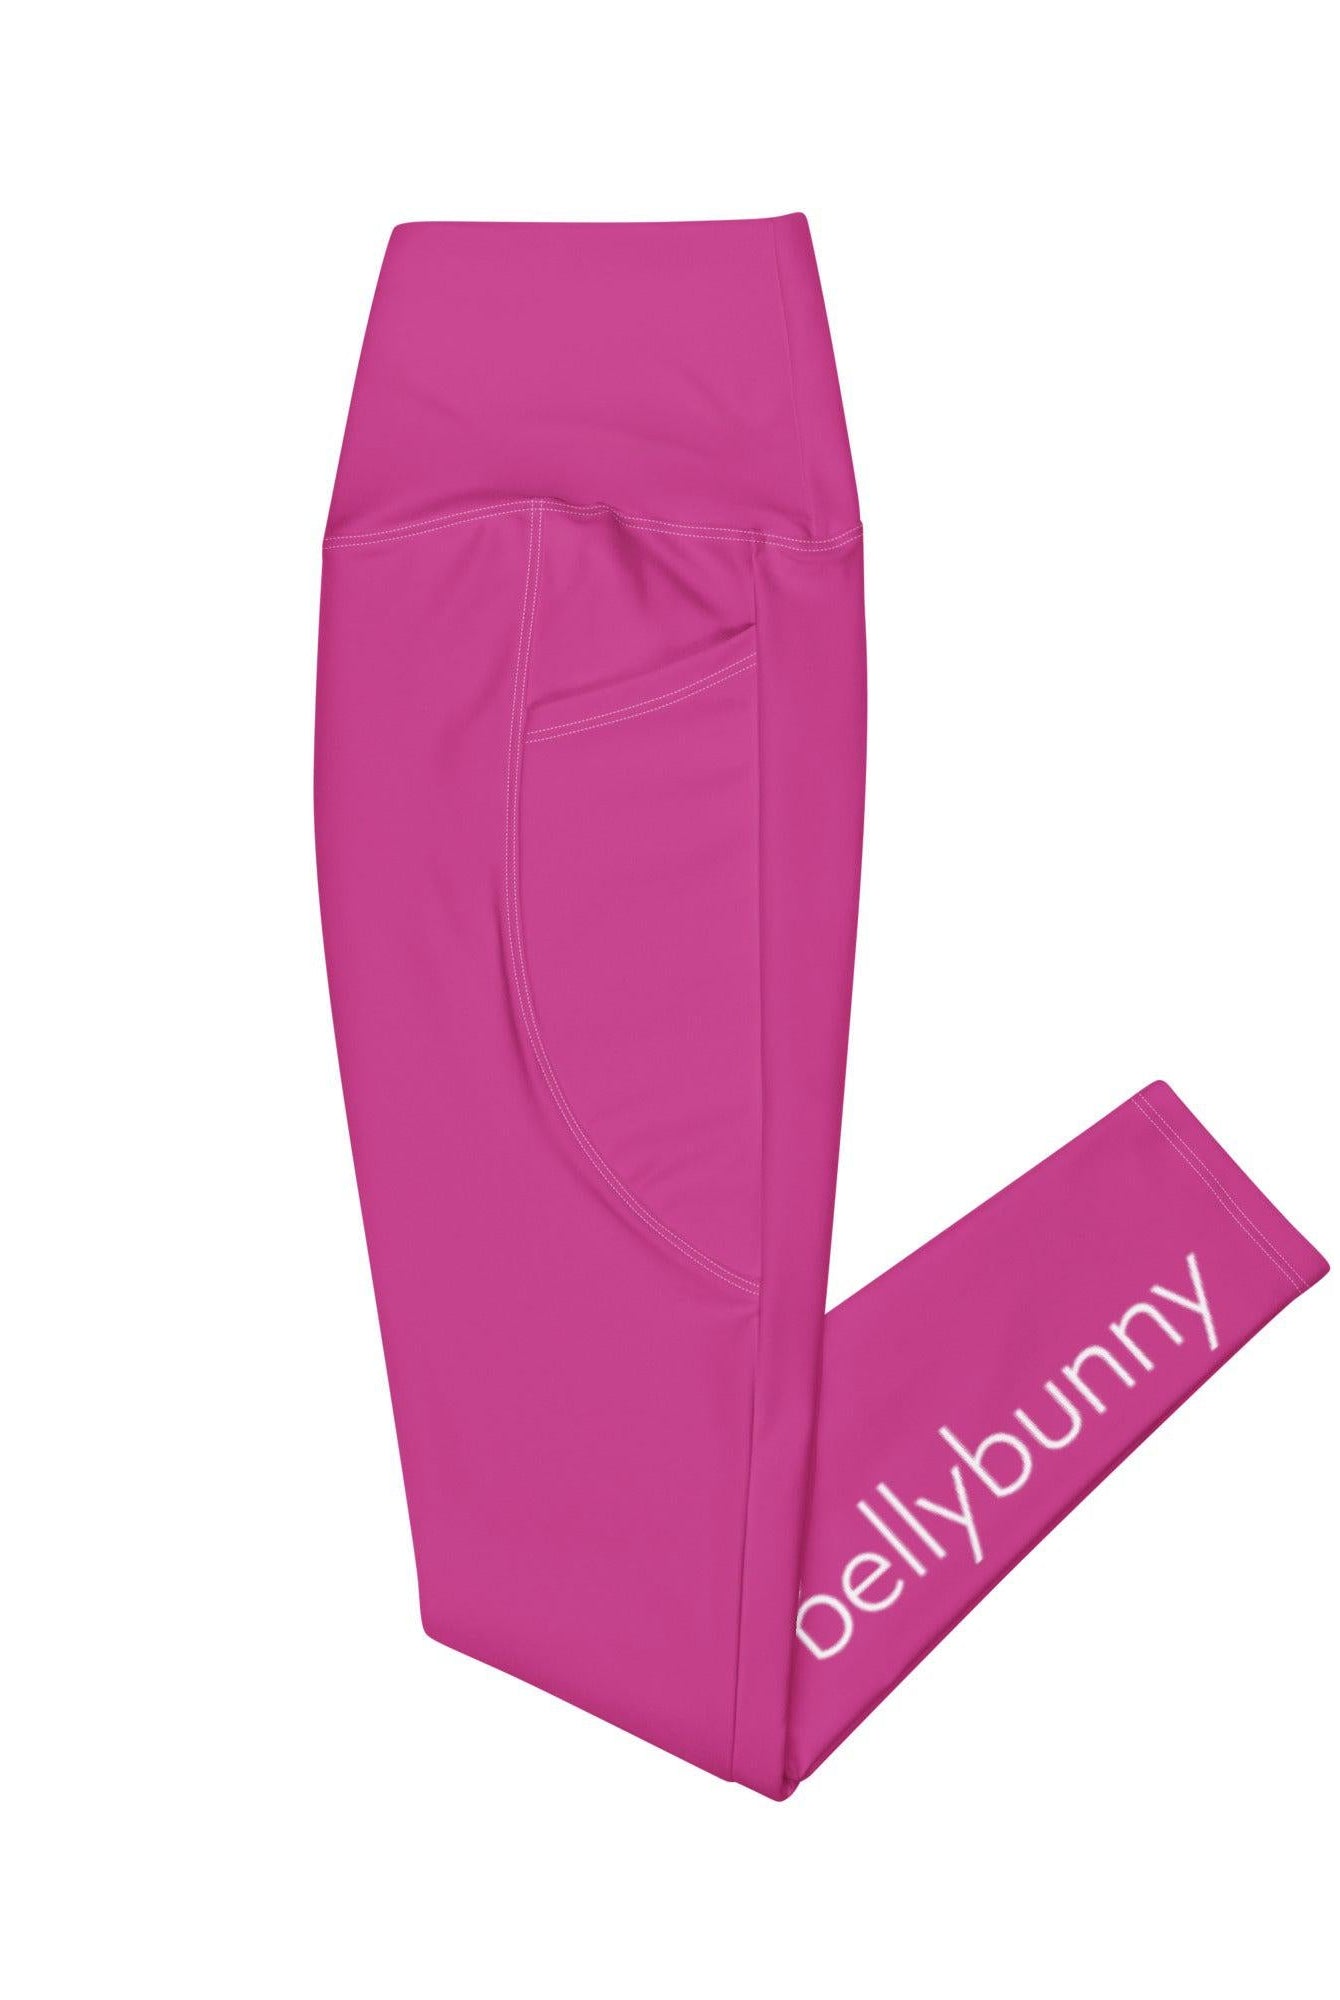 Bellybunny-Women's Classic Leggings-Pink with White Logo